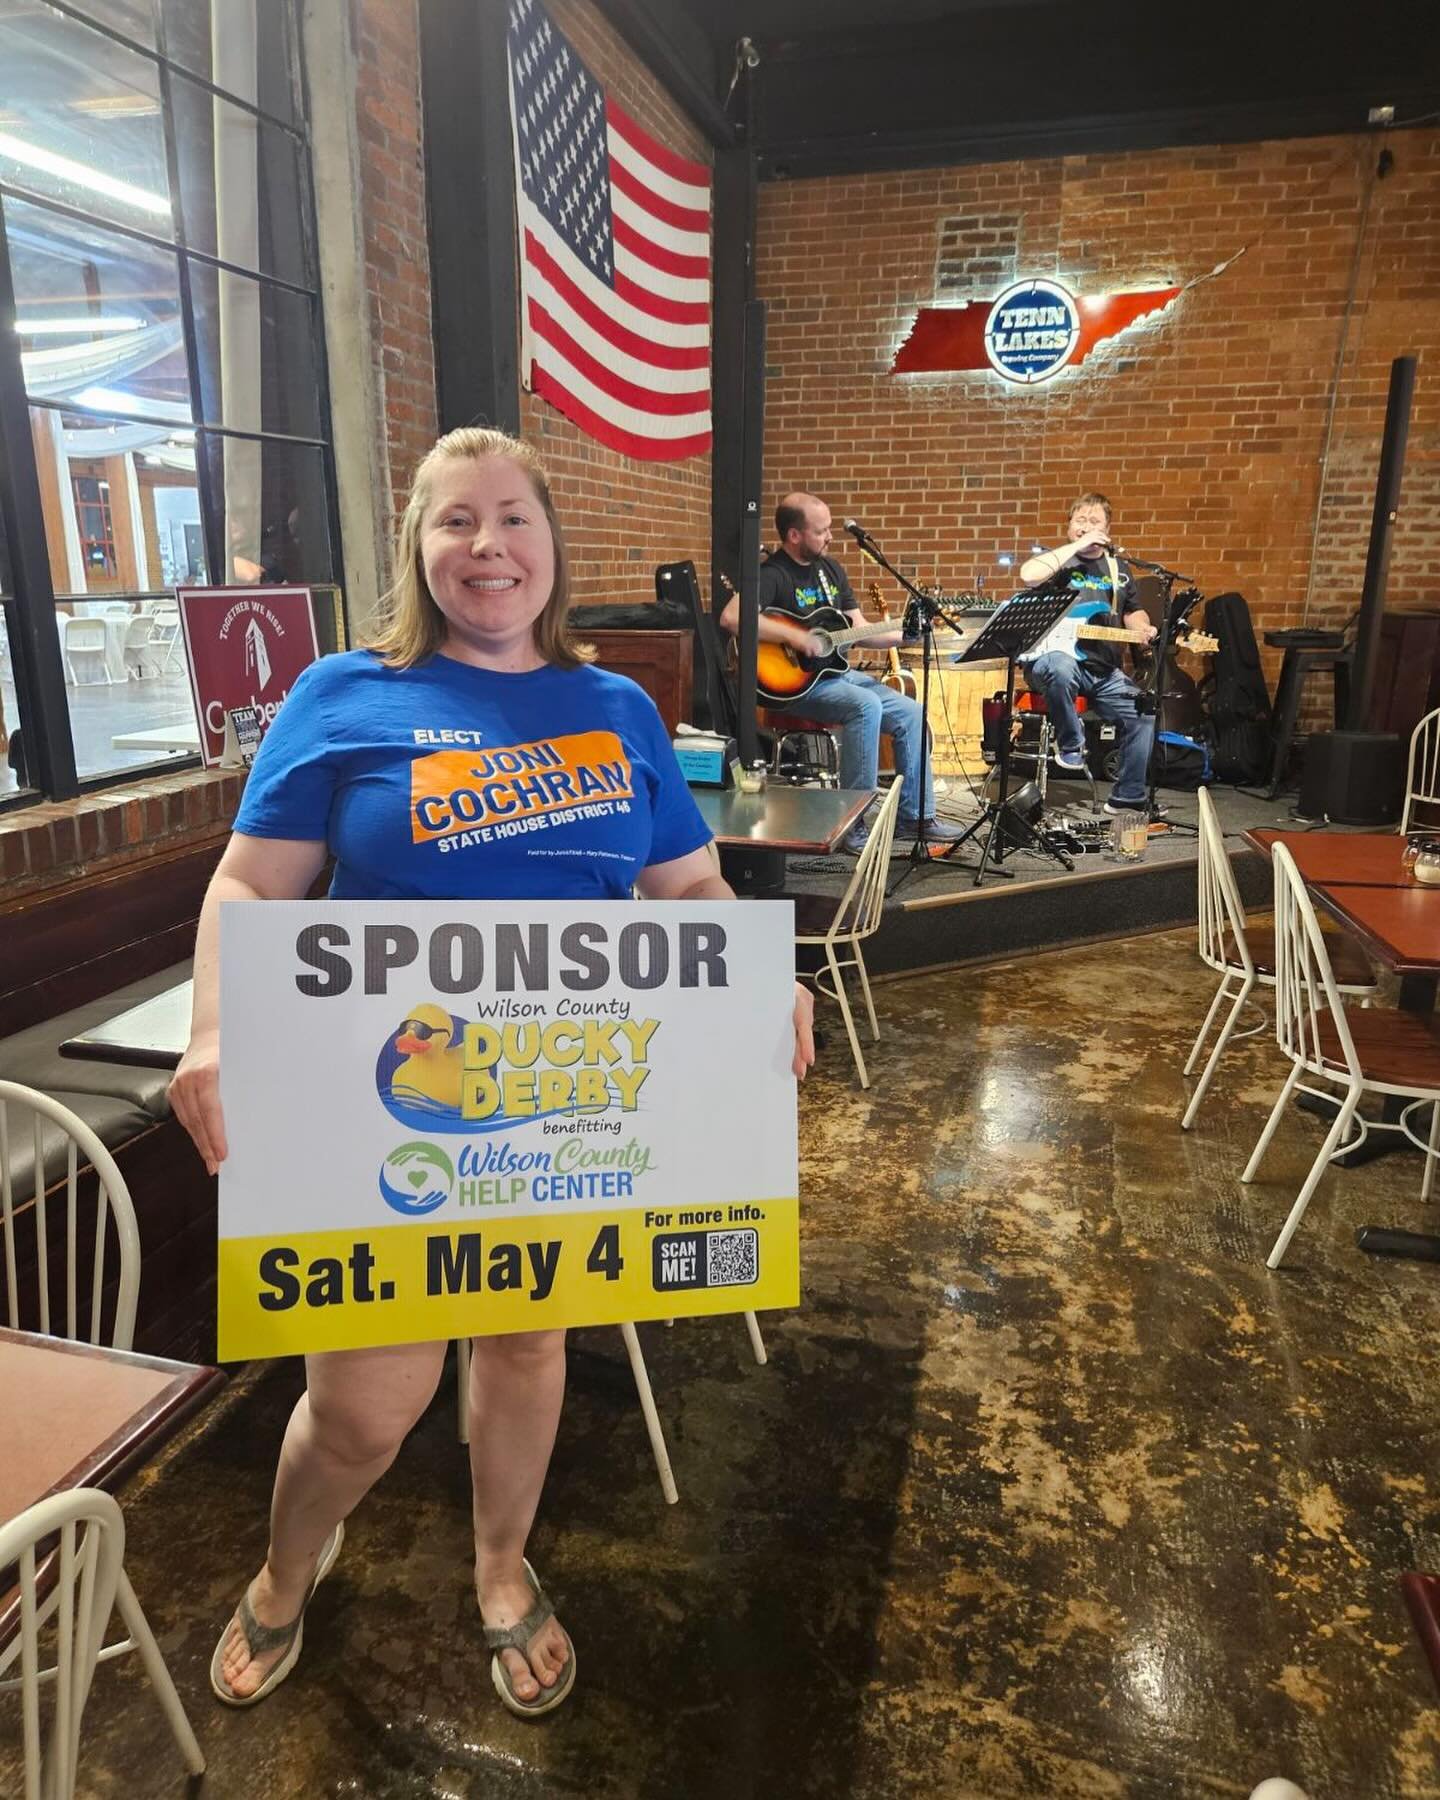 We&rsquo;re excited to sponsor 25 duckies to support the Wilson County Help Center on May 4th! Duck, Duck Go! 💛 You can buy tickets for the Ducky Derby at WilsonCountyHelpCenter.org 🐥